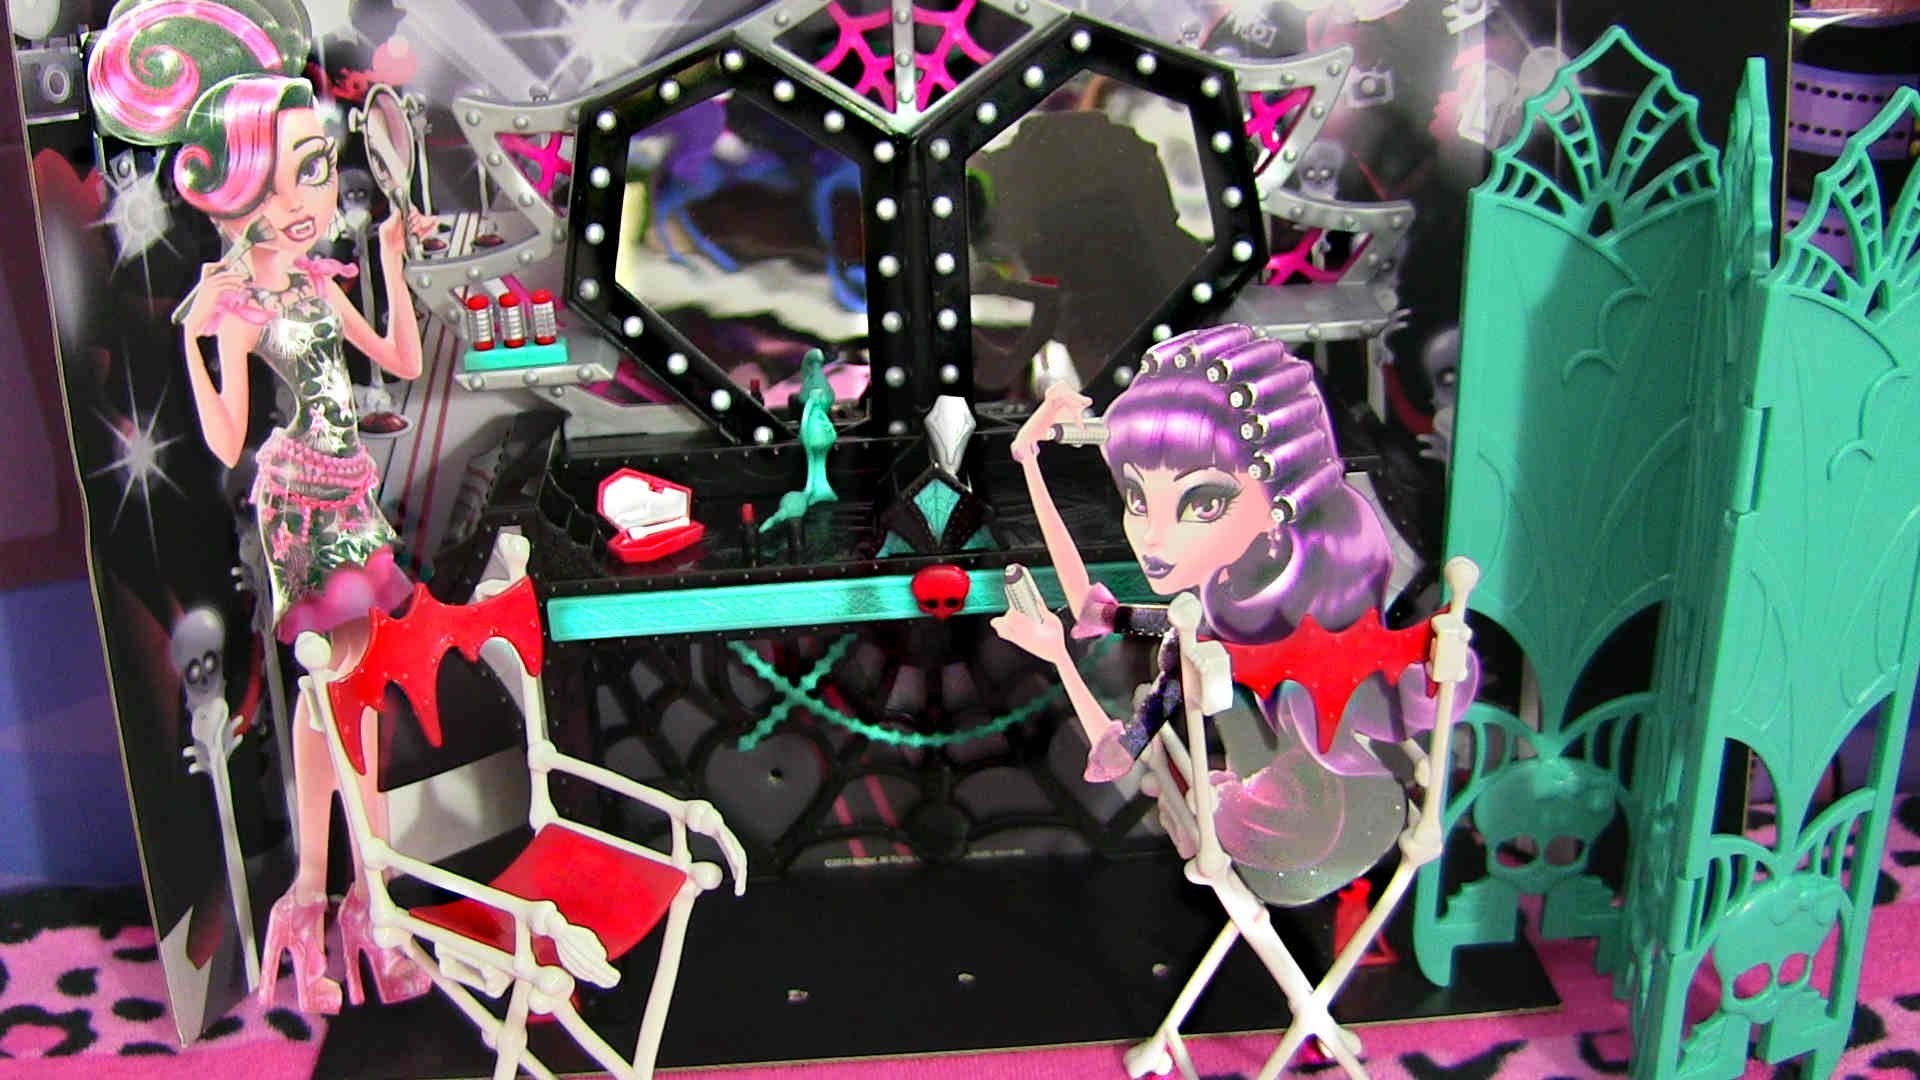 1920x1080 MONSTER HIGH FRIGHTS CAMERA ACTION! DRESSING ROOM PLAYSET REVIEW VIDEO!!!  :D - YouTube